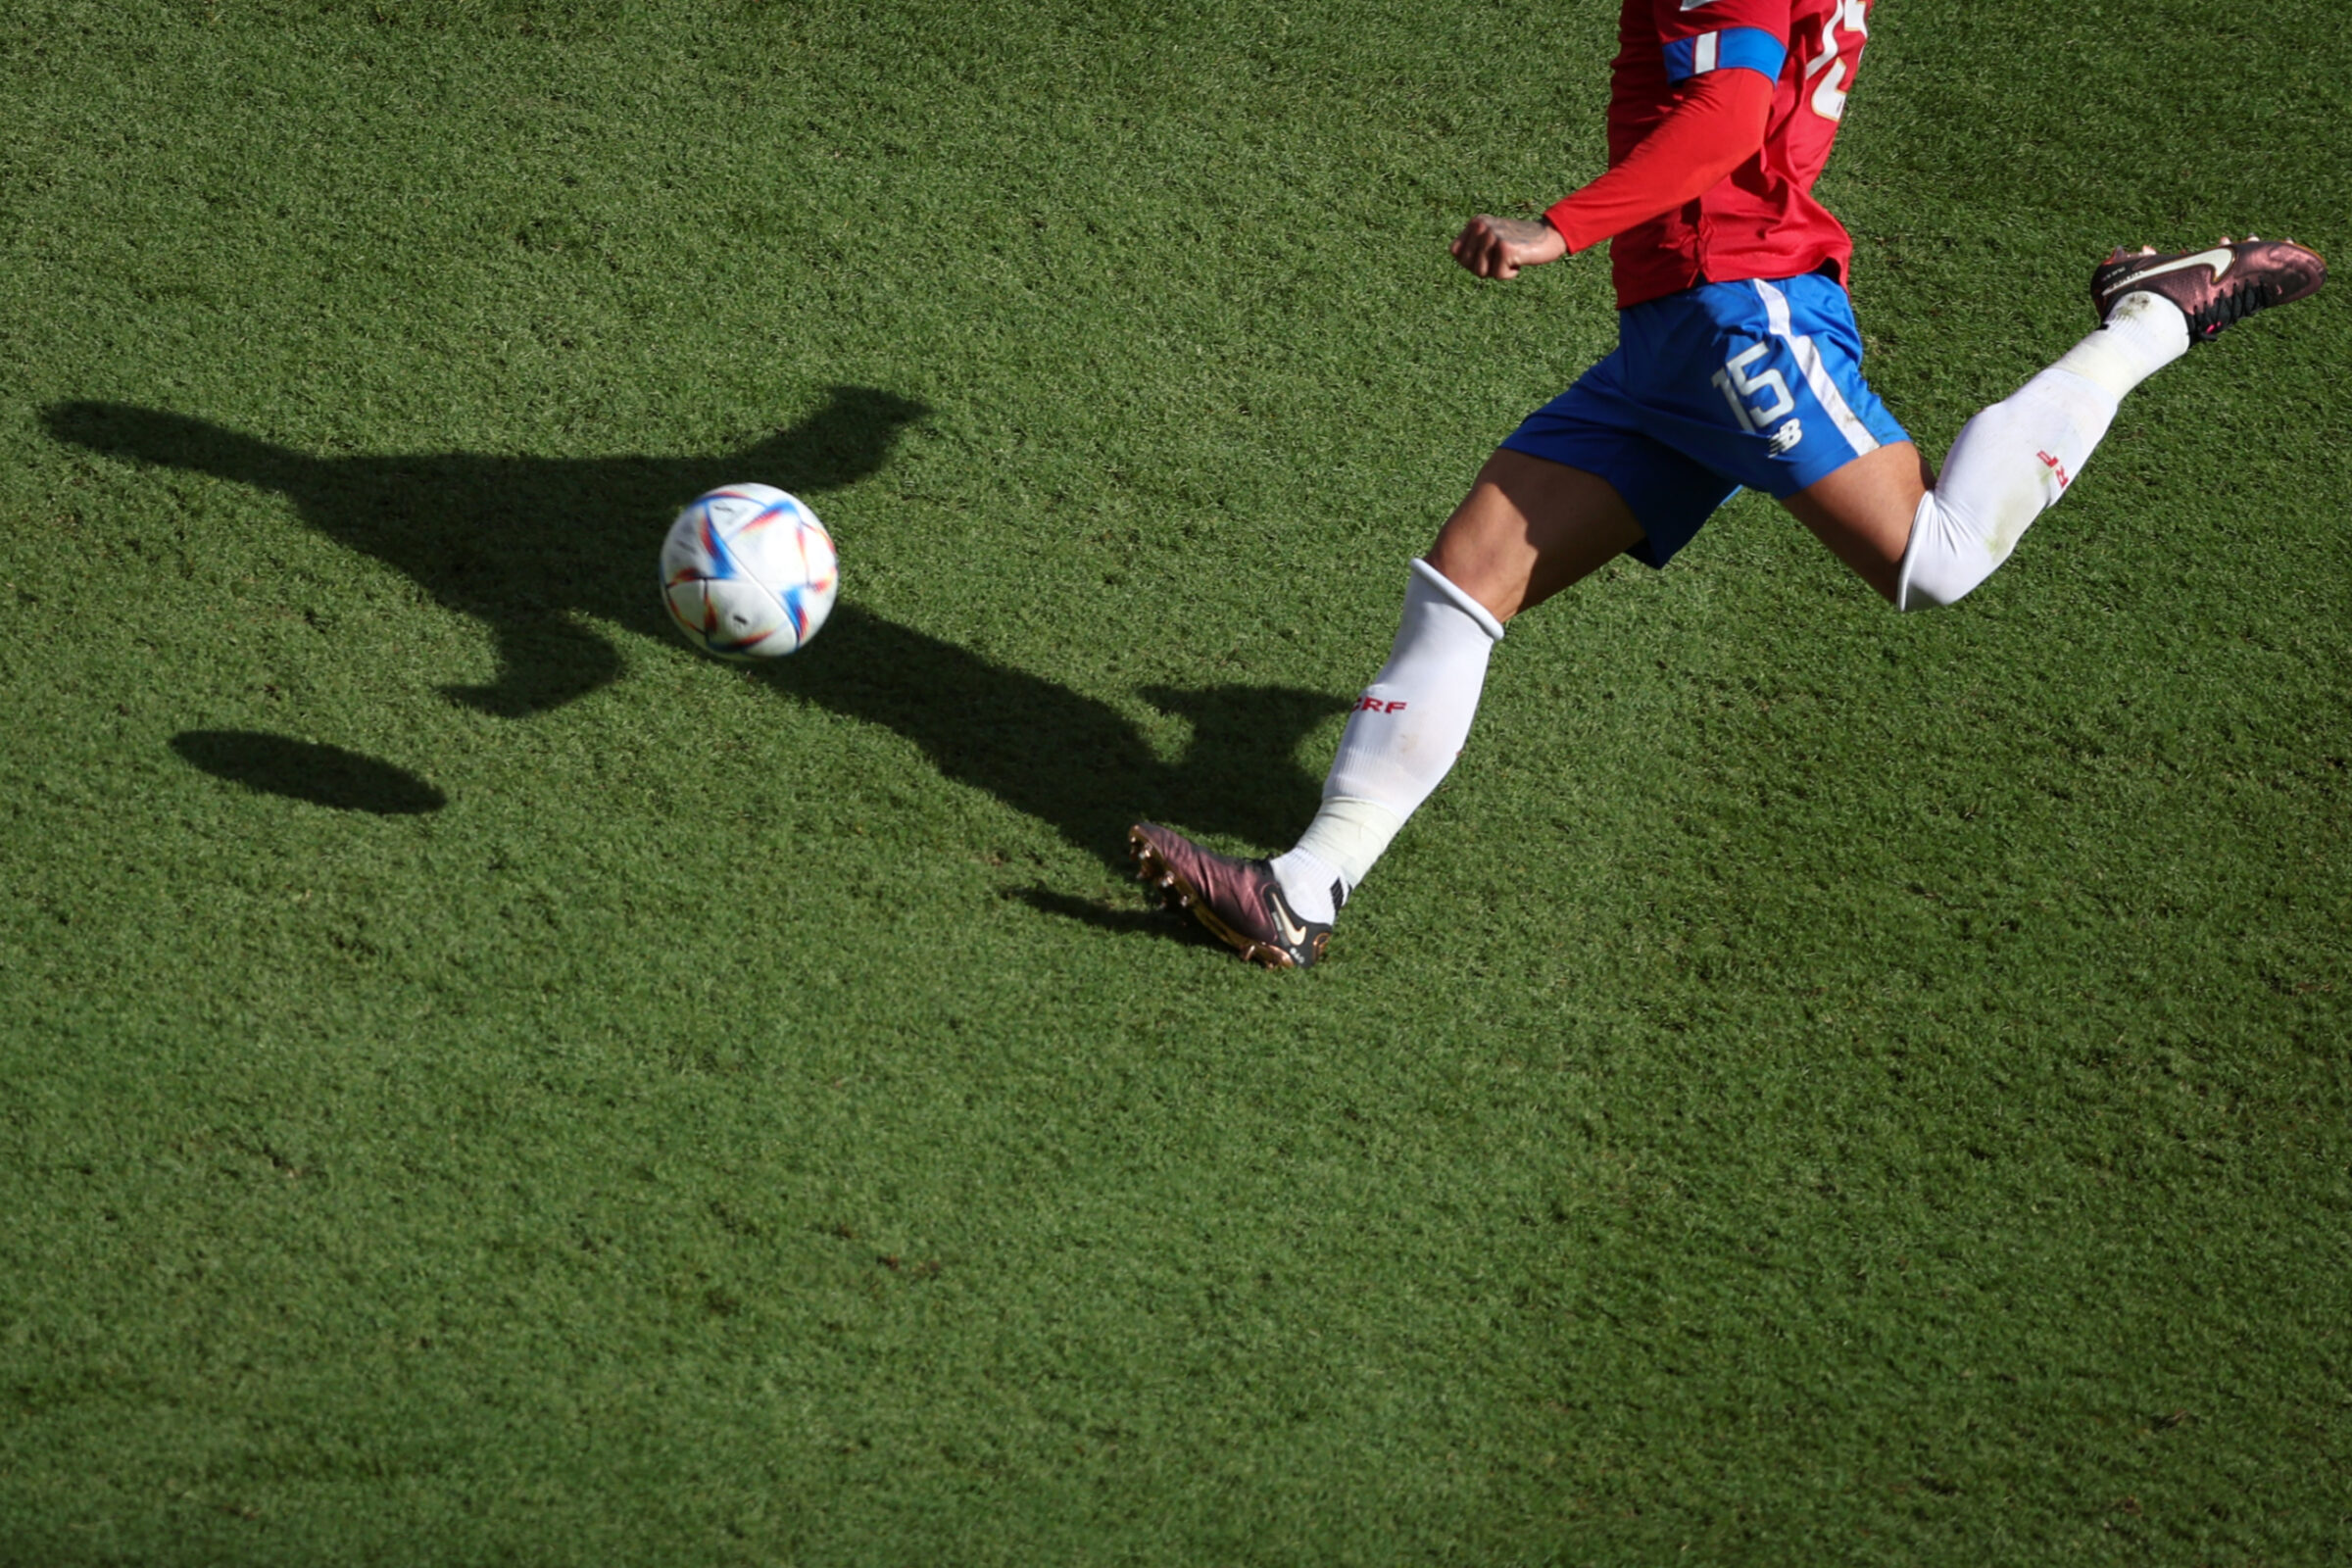 A player kicks a ball that is equipped with a sensor and provides data to coaches and sports analysts.